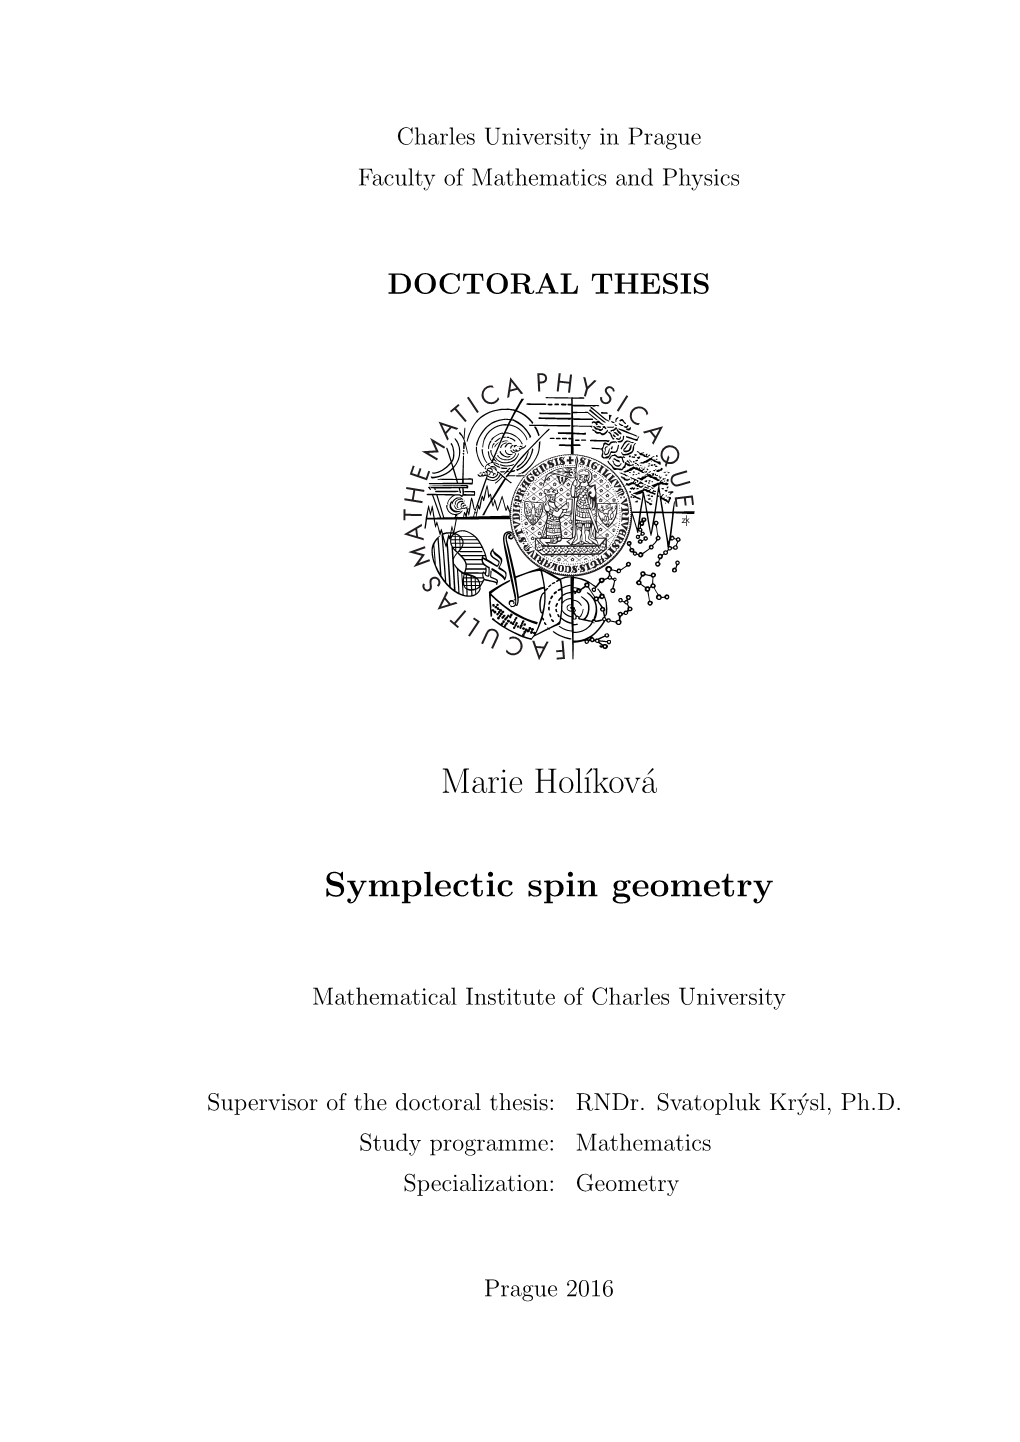 Marie Hol´Iková Symplectic Spin Geometry